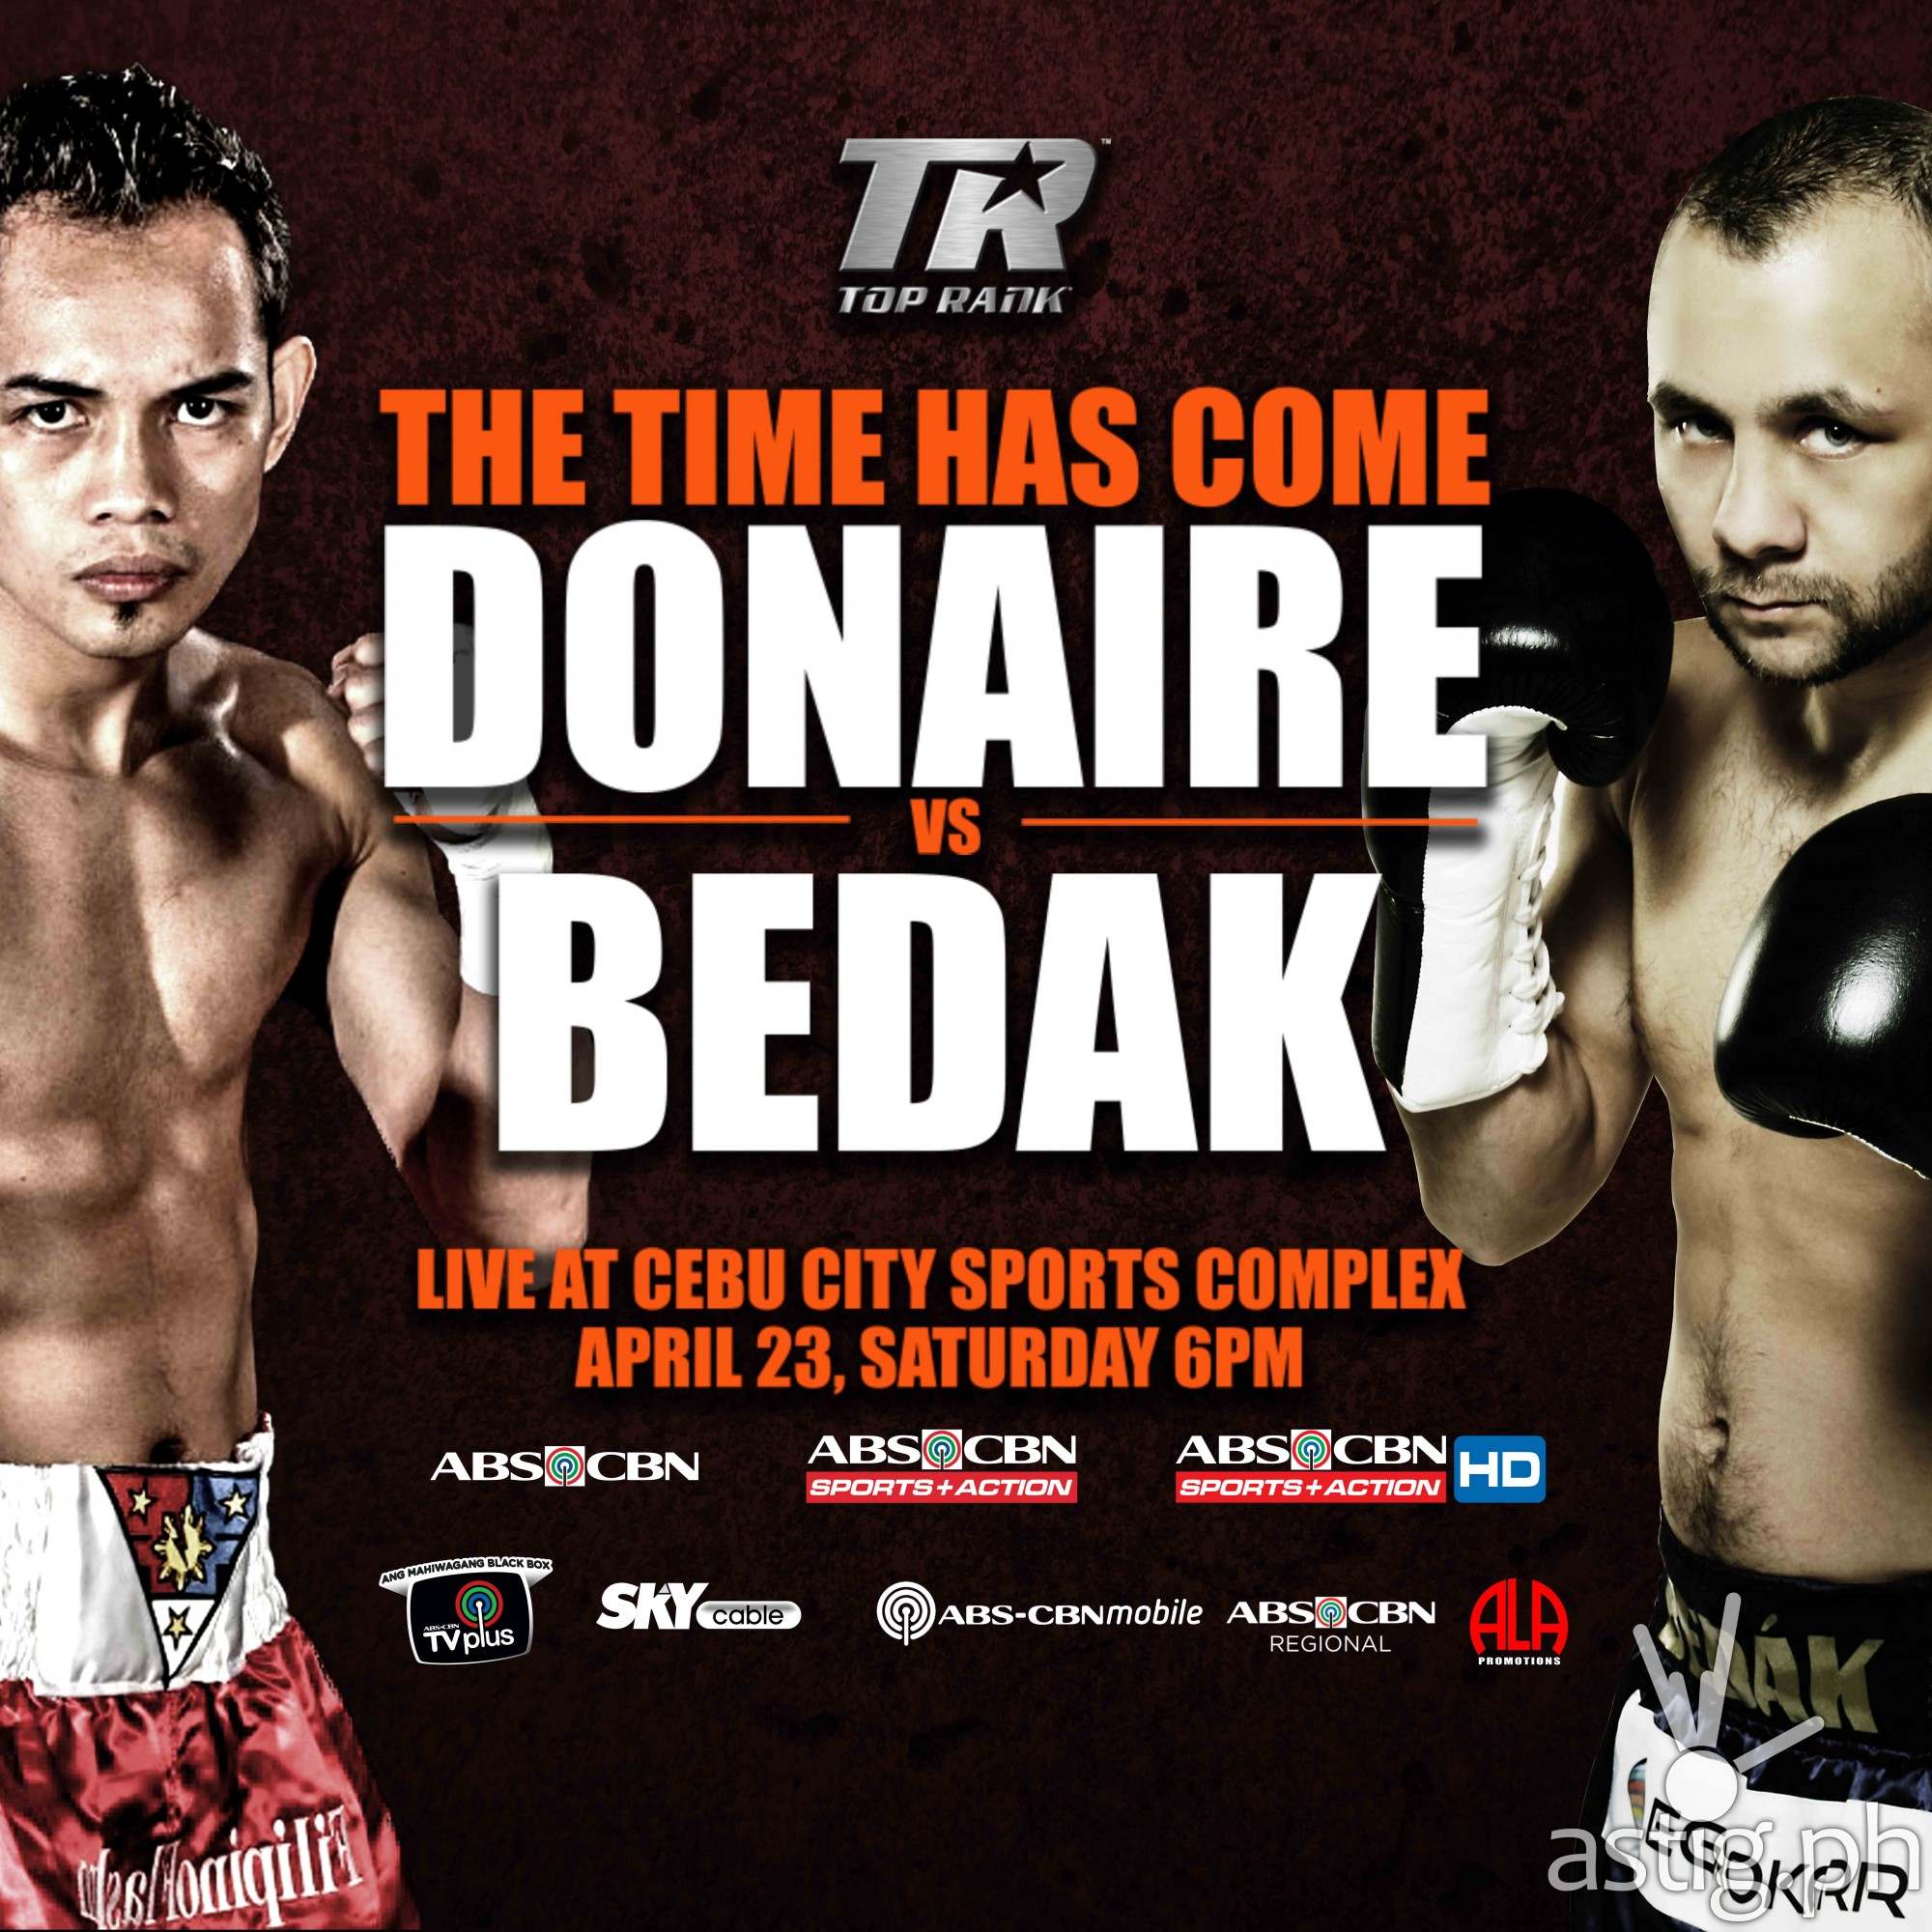 The time has come for Donaire to raise the championship belt once more